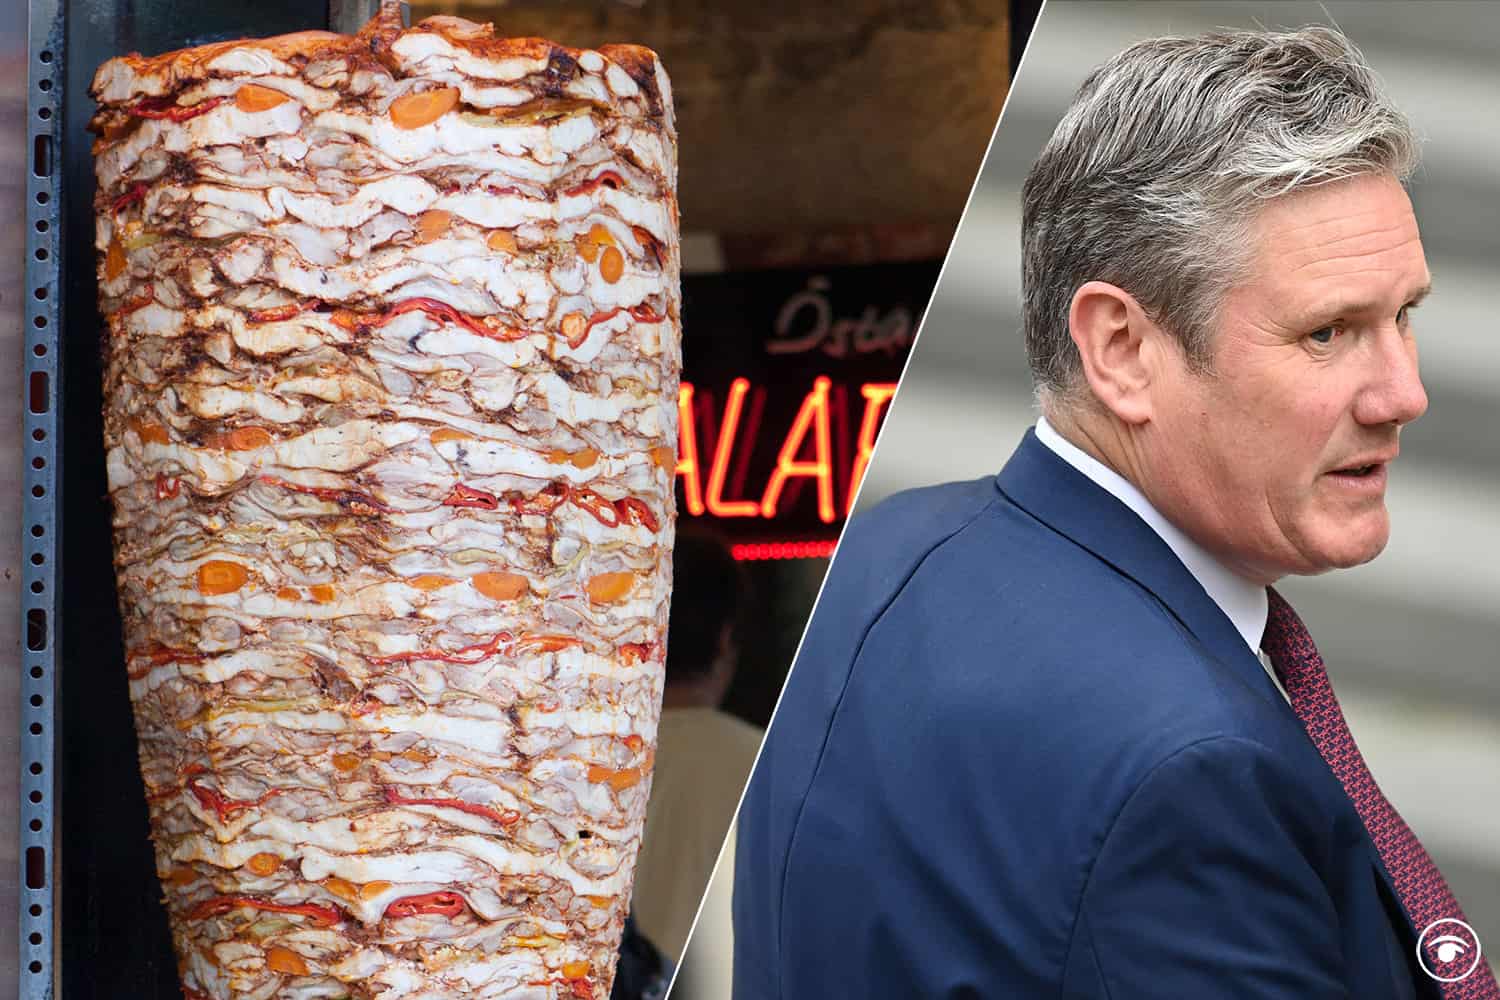 Kebab awards among Starmer’s alleged breaches of MPs’ rules